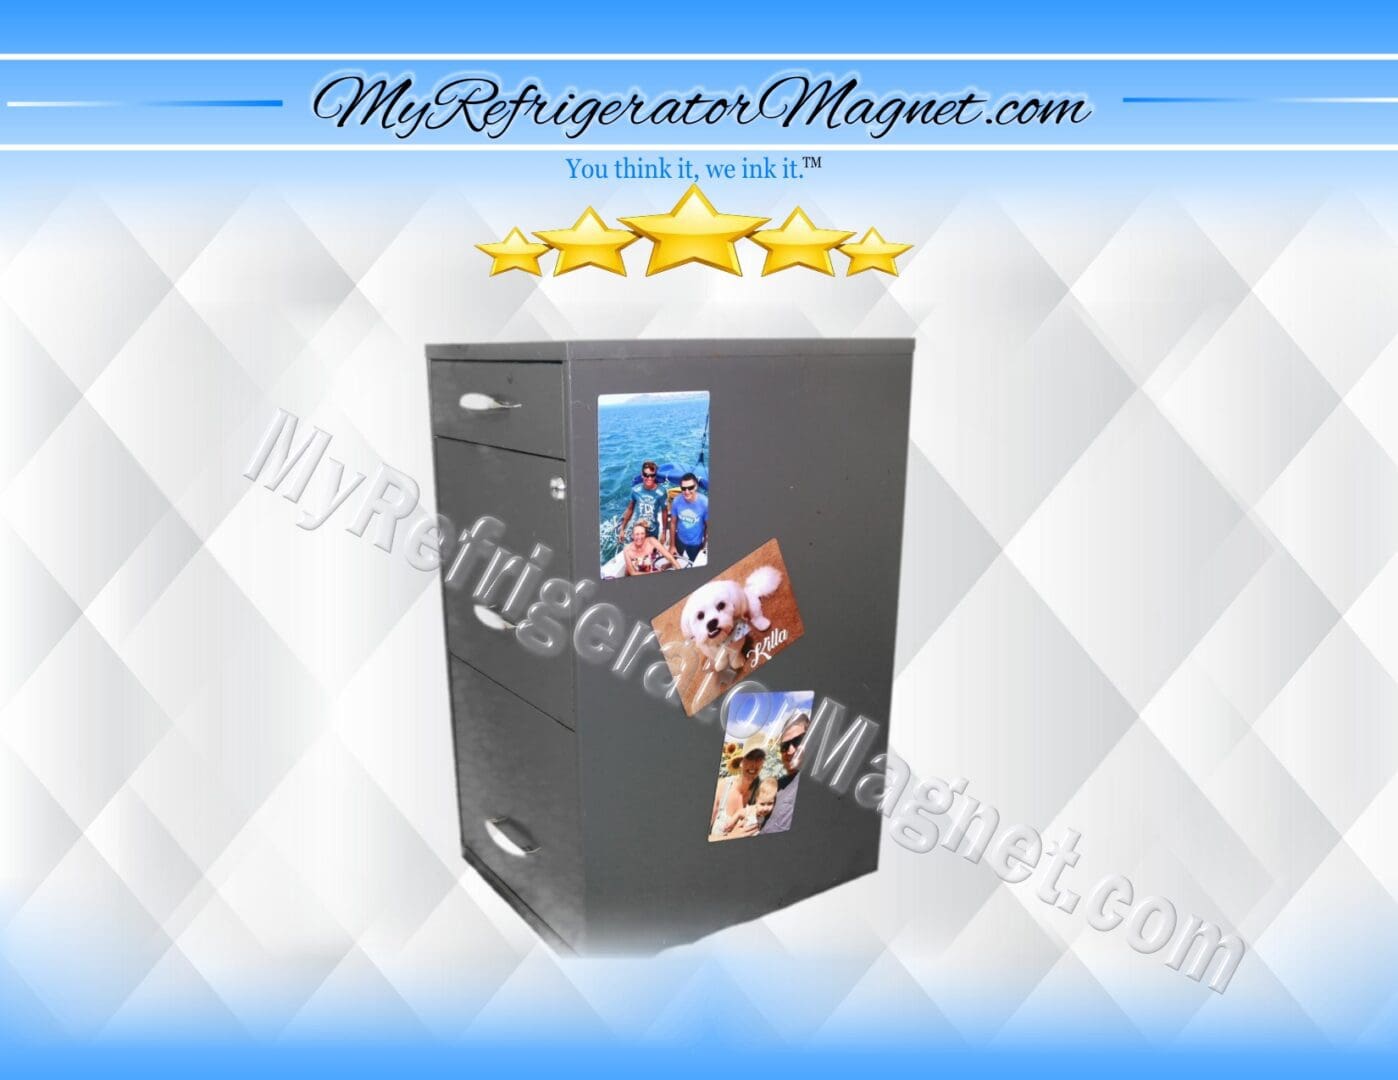 A refrigerator with pictures of people and animals on it.